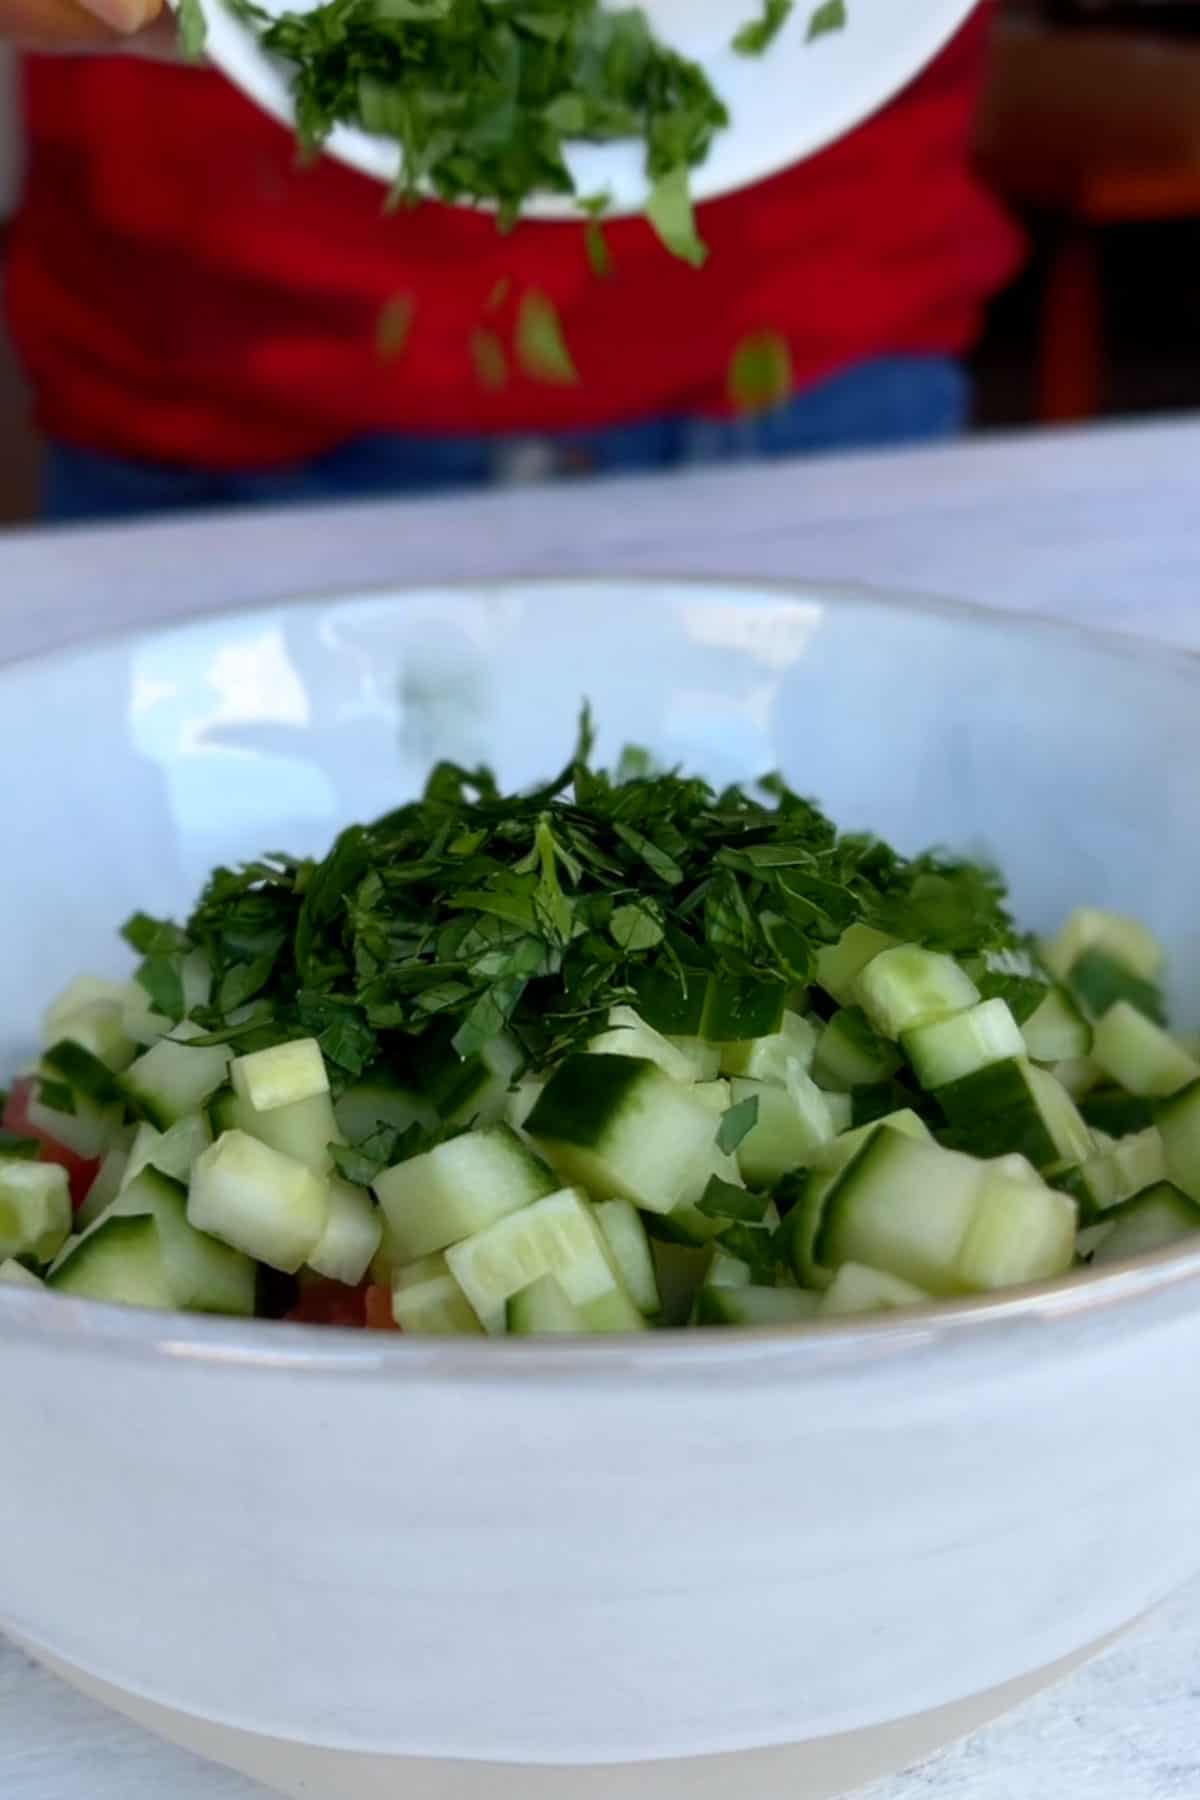 Pouring chopped fresh green herbs into a bowl of chopped cucumber and tomatoes.